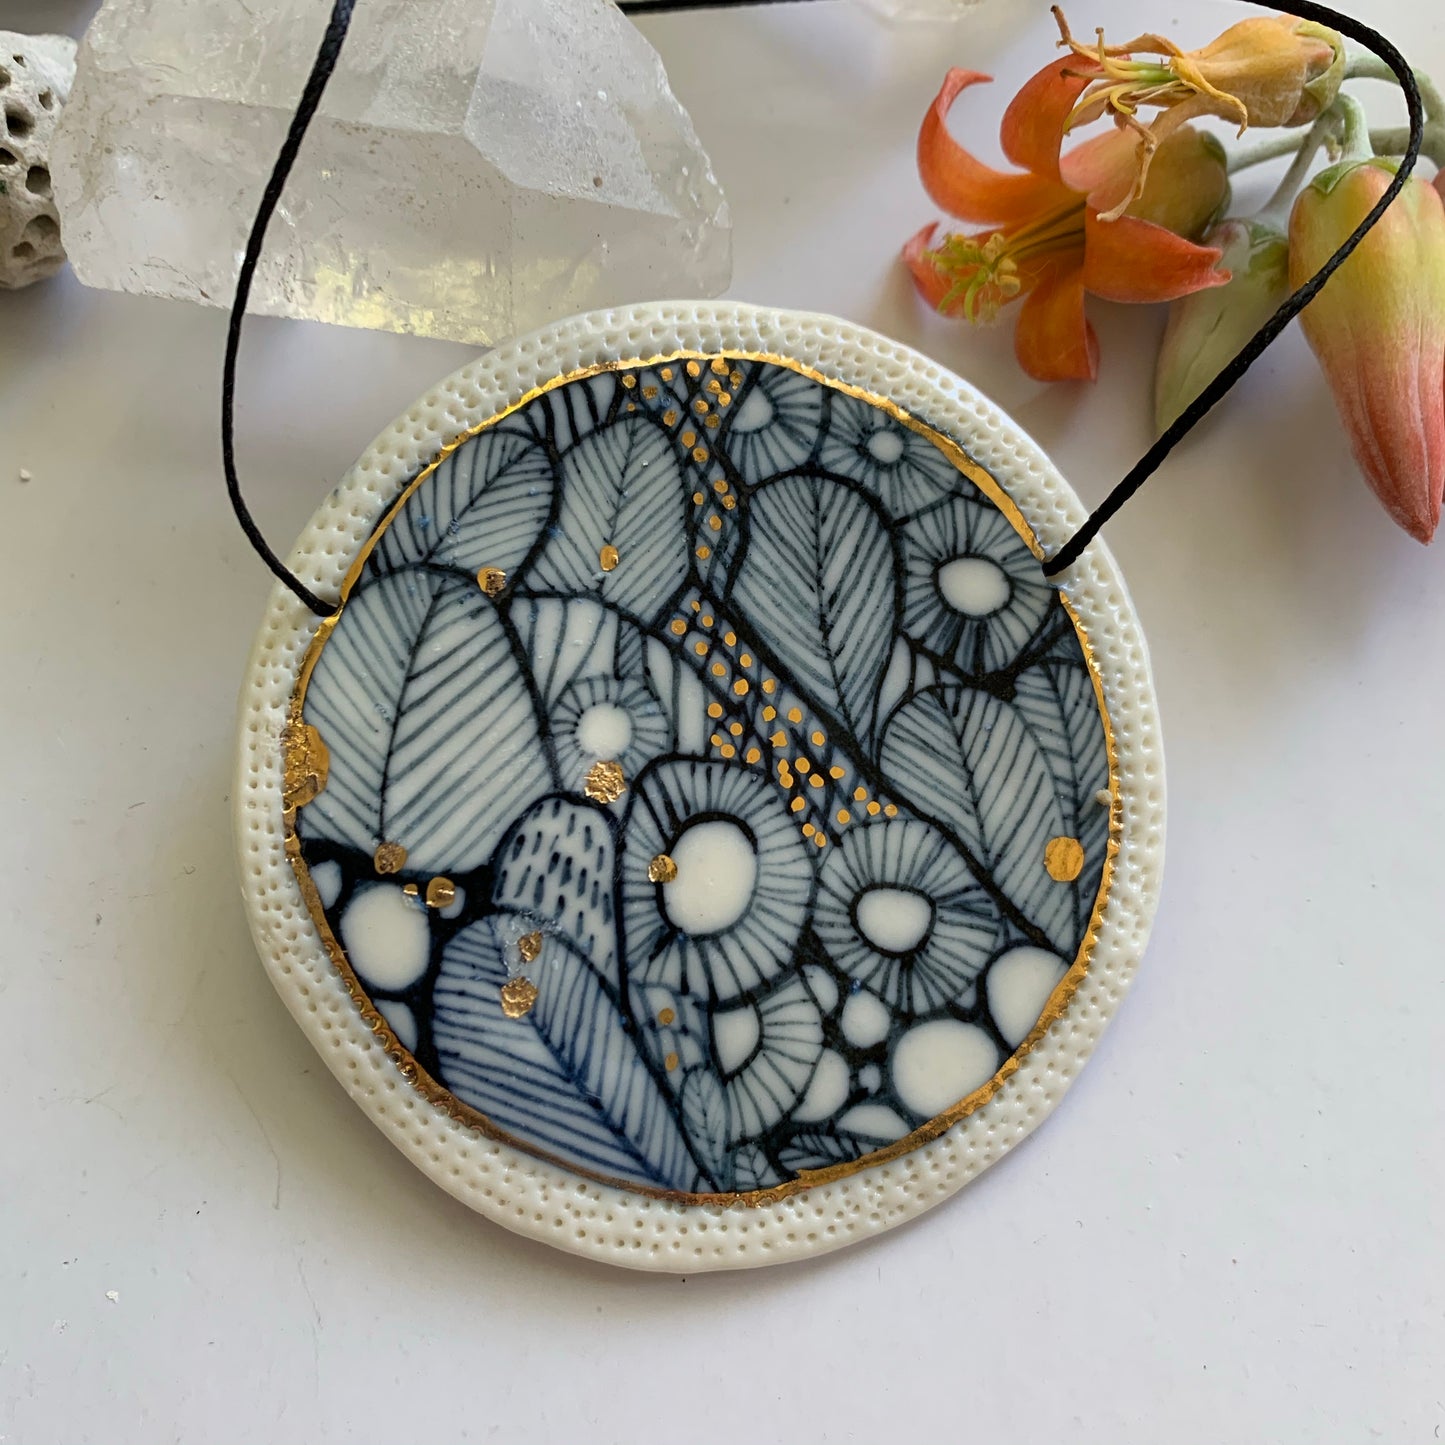 Indigo hand painted pendant with gold lustre detail